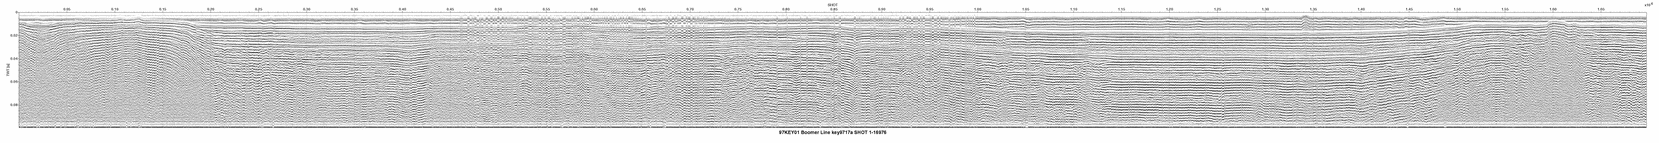 Thumbnail GIF image of the seismic trackline key9717a, with a hotlink to the more detailed, larger JPG image.